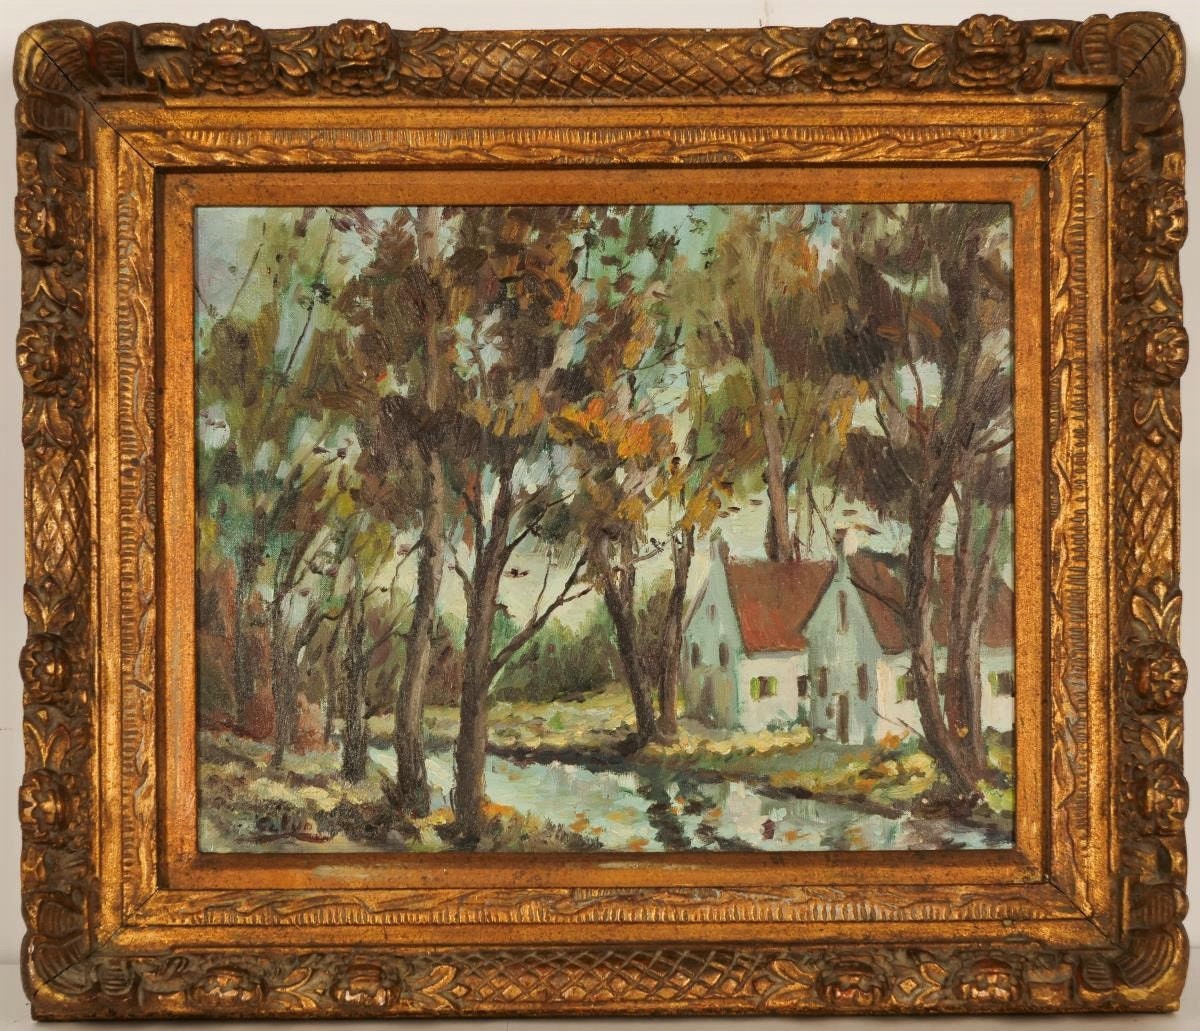 Maria del Carmen Calvo (America/Spain 1937-2019) Original Oil - 27"H x 23"W- in numerous Museums-Well listed-High auction & galley prices!!